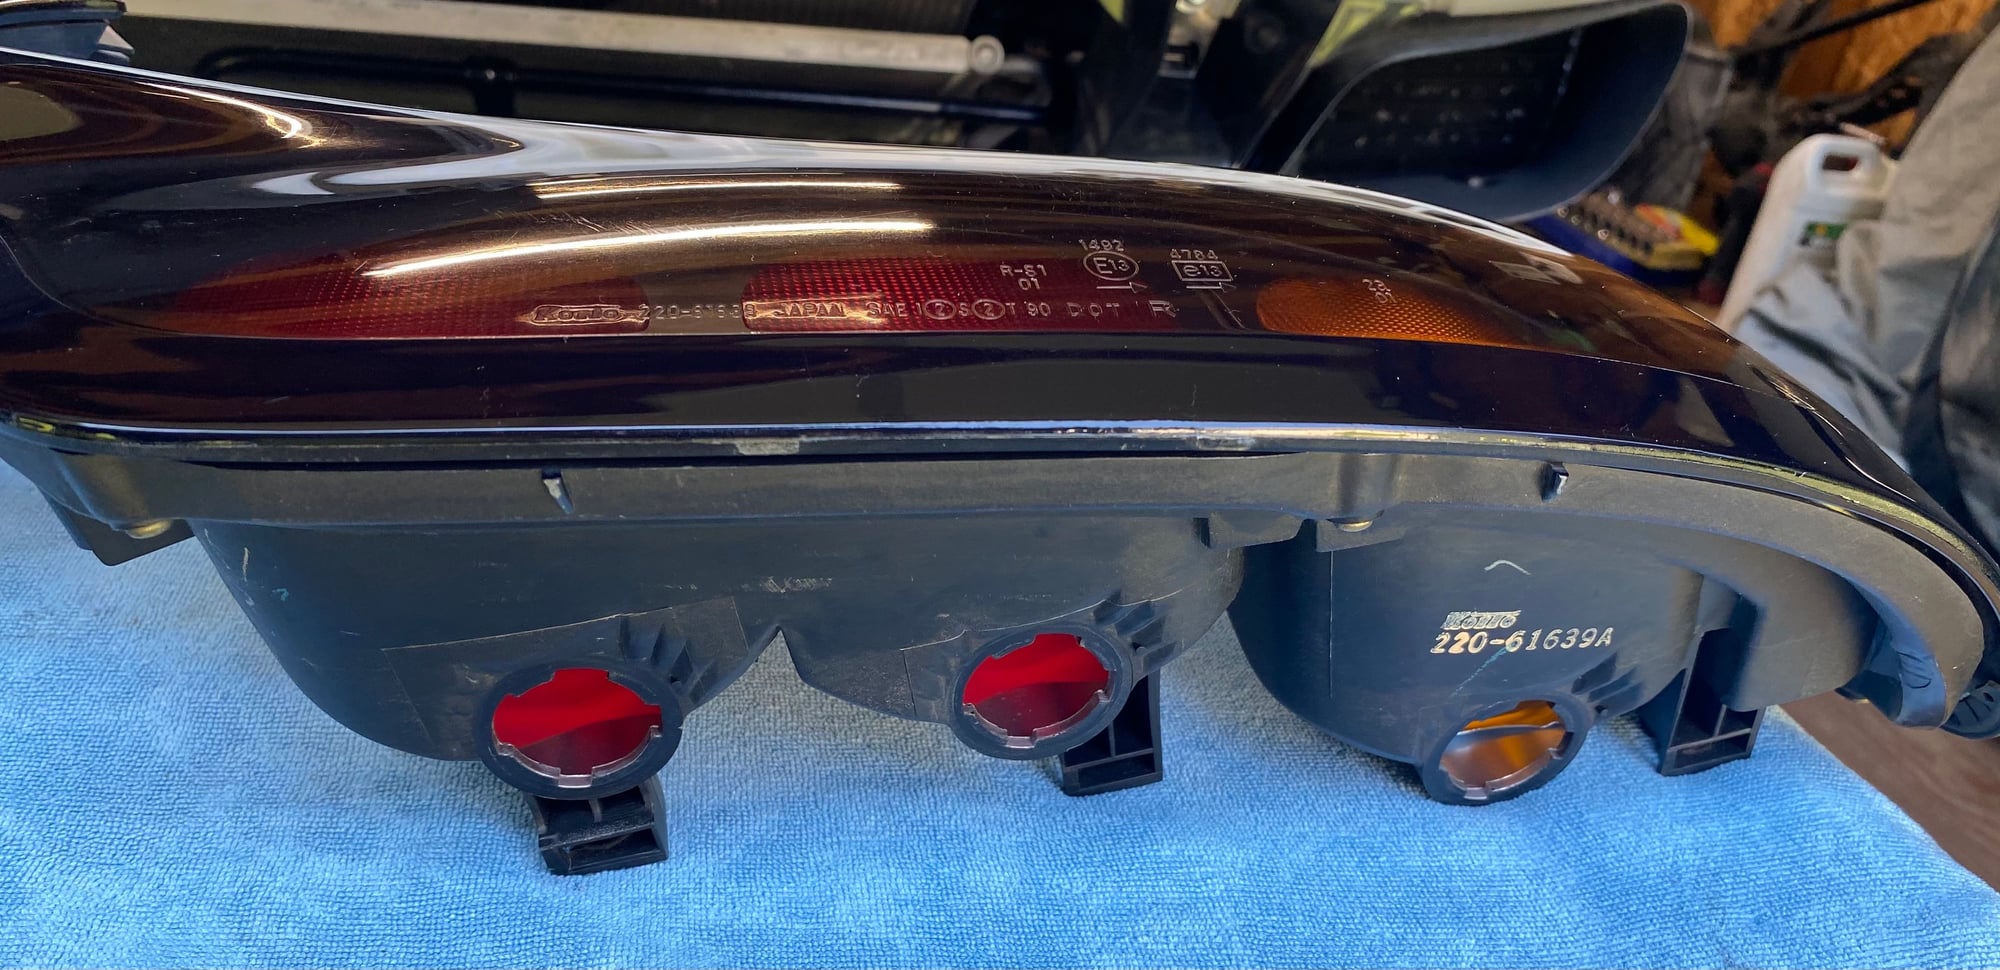 Lights - FD RX-7 99 Spec Round Taillights Excellent Condition!! - Used - 1992 to 2002 Mazda RX-7 - Prince Frederick, MD 20678, United States